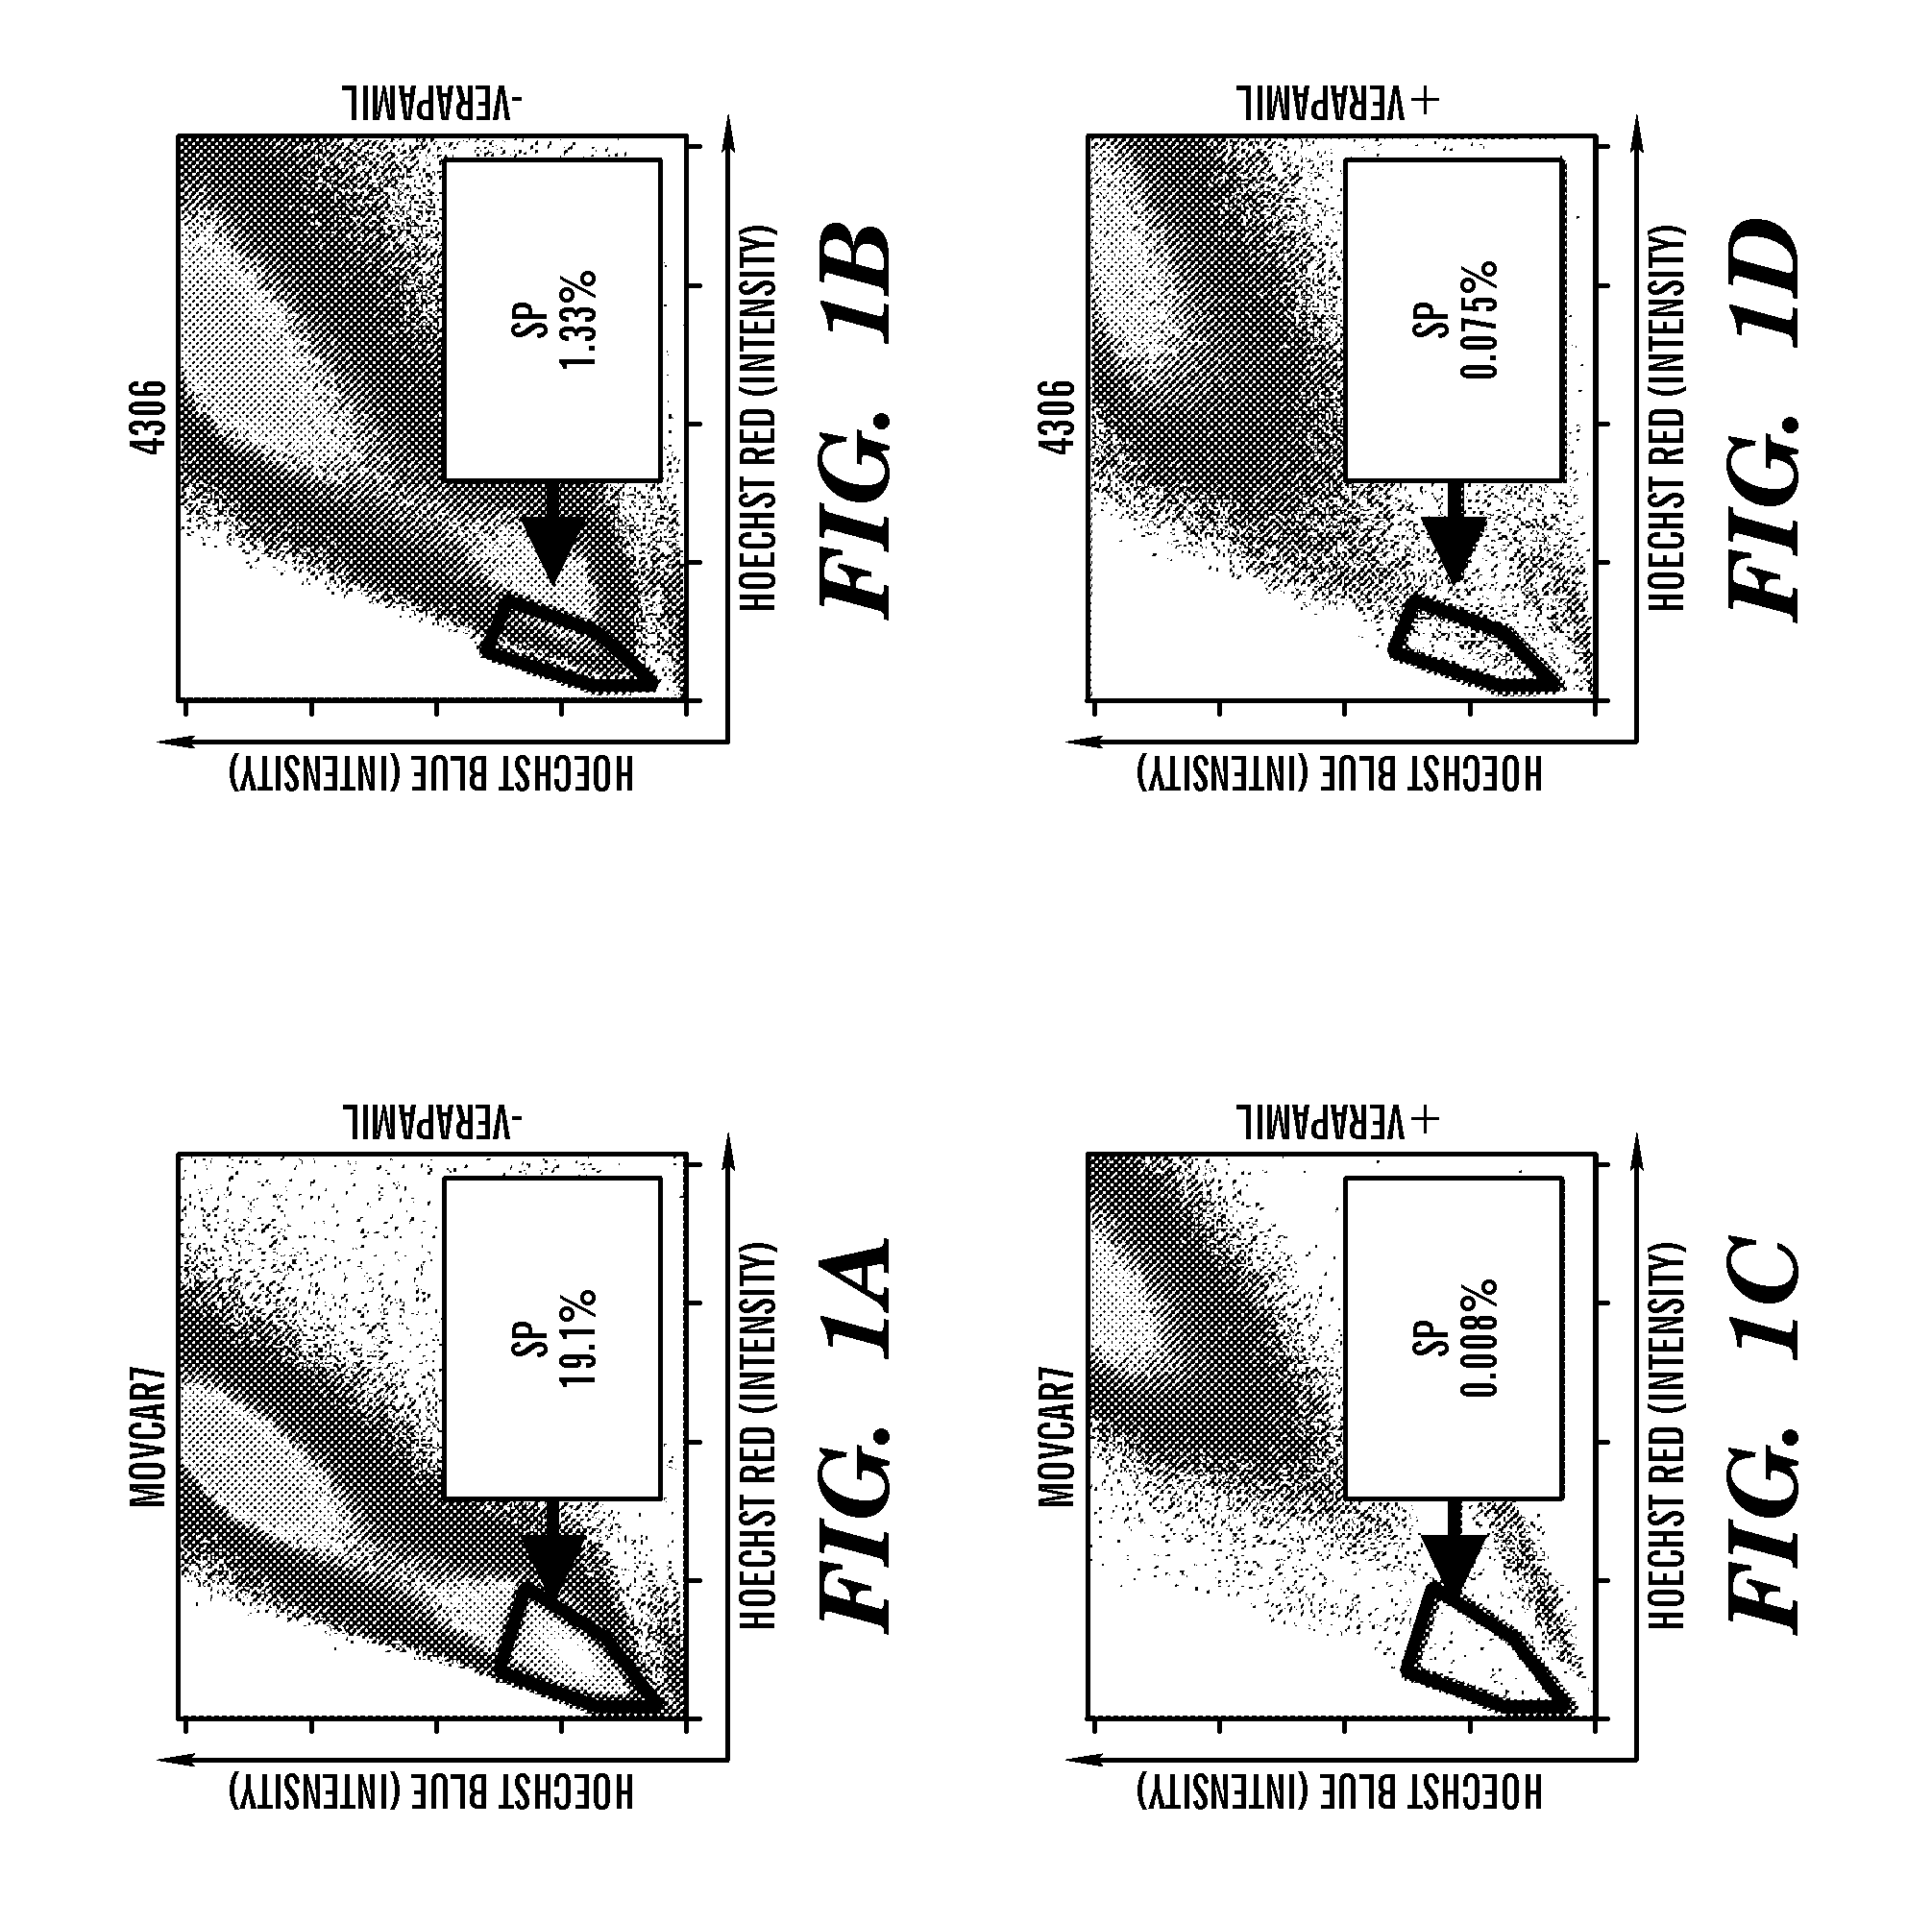 Methods to identify and enrich for populations of ovarian cancer stem cells and somatic ovarian stem cells and uses thereof